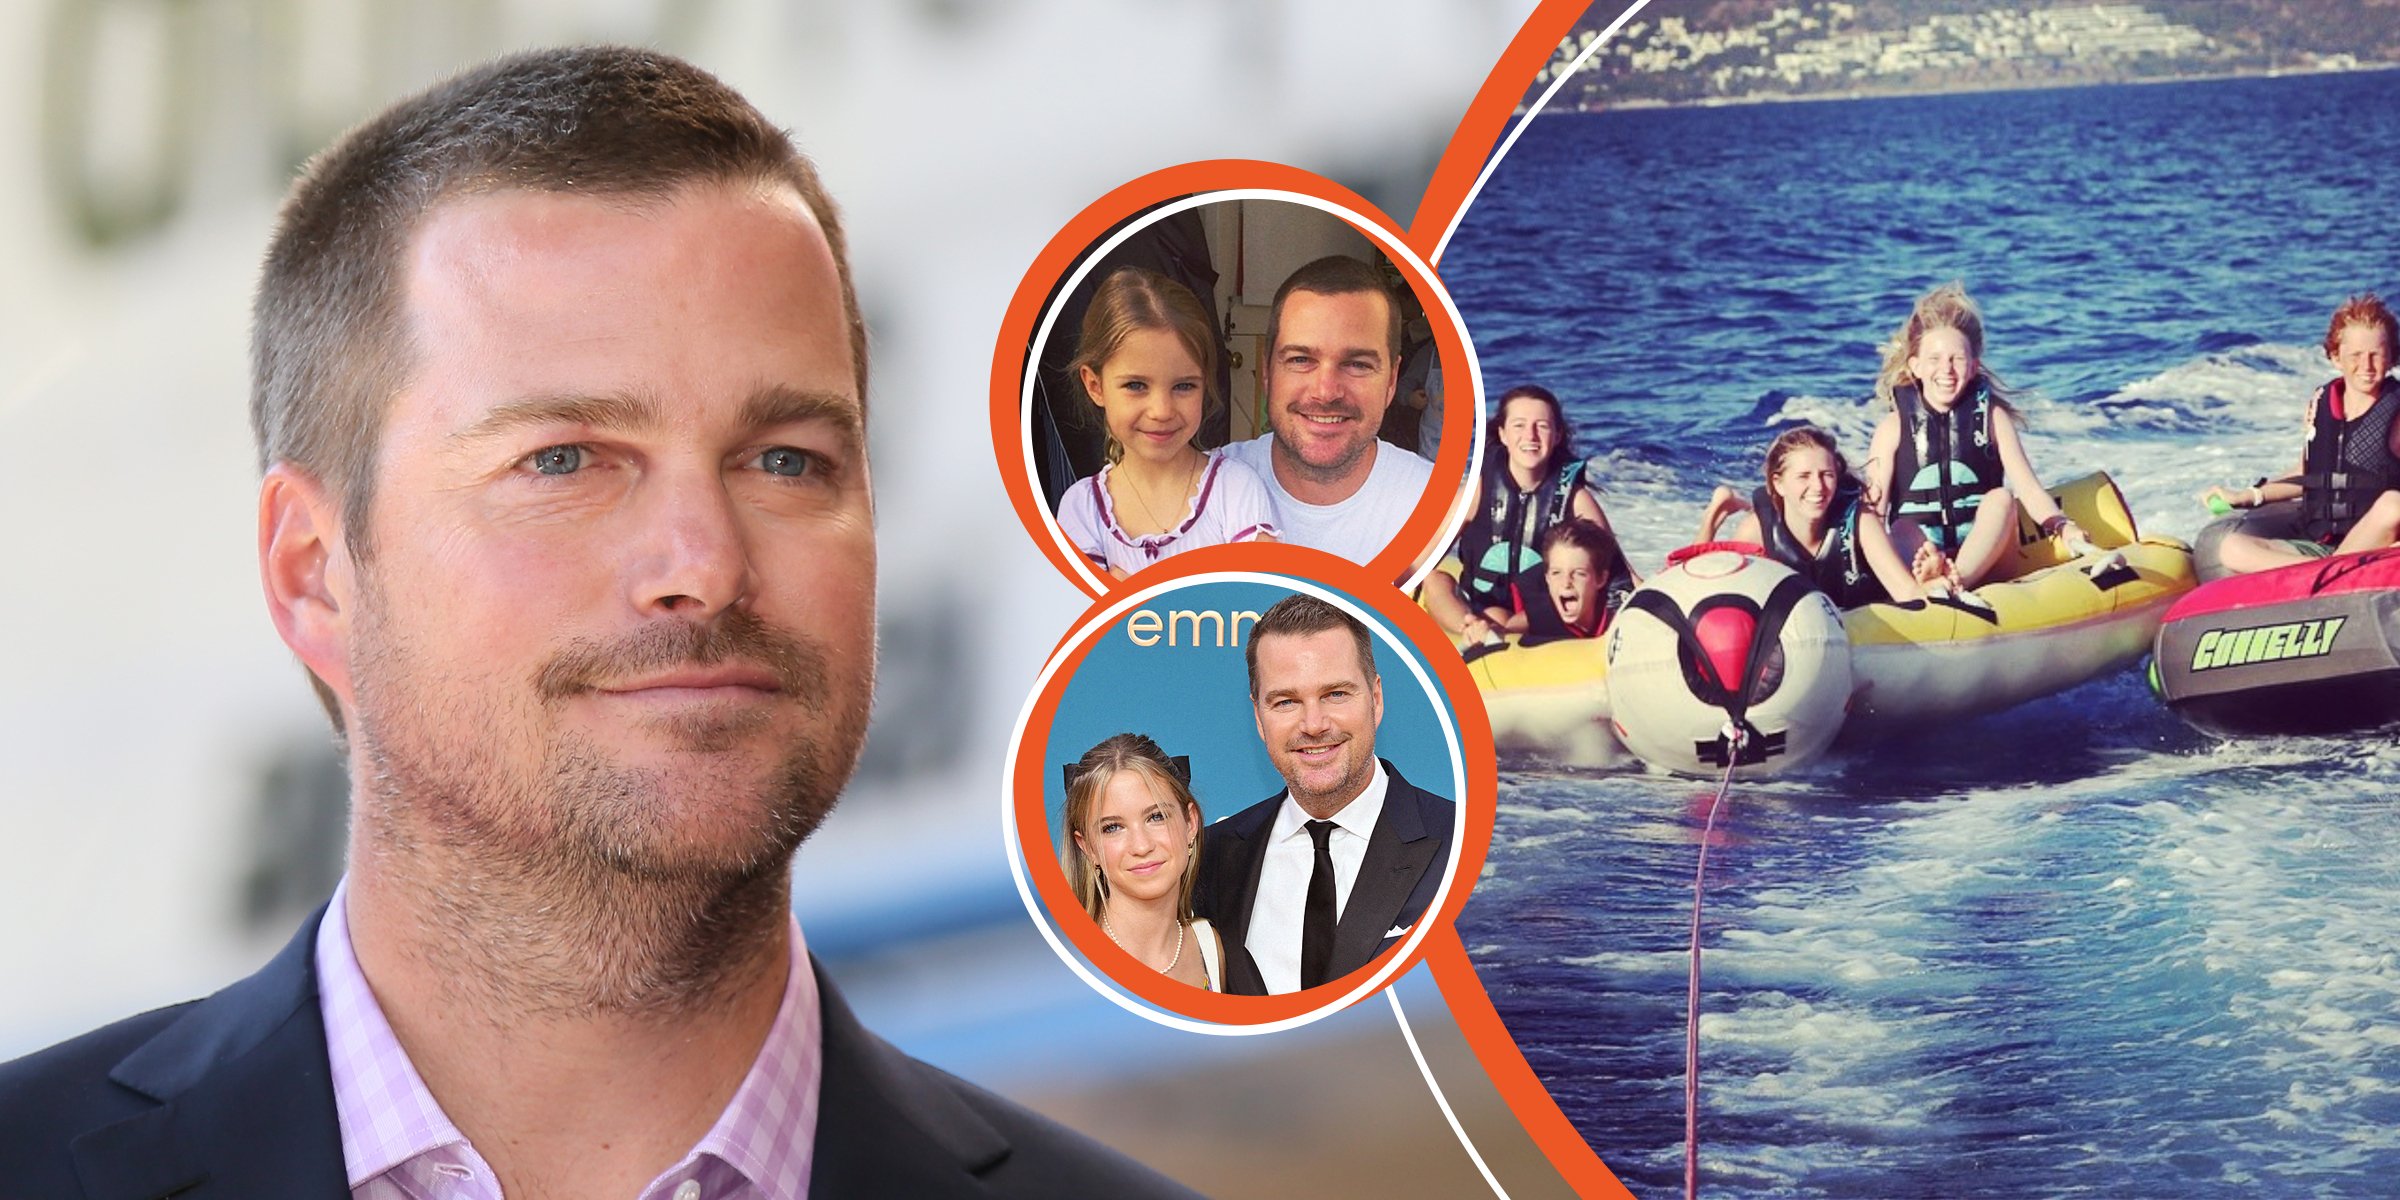 Chris O' Donnell | Chris O' Donnel and his daughter, Maeve | Chris O' Donnell's children | Source: Instagram.com/chrisodonnell | Getty Images